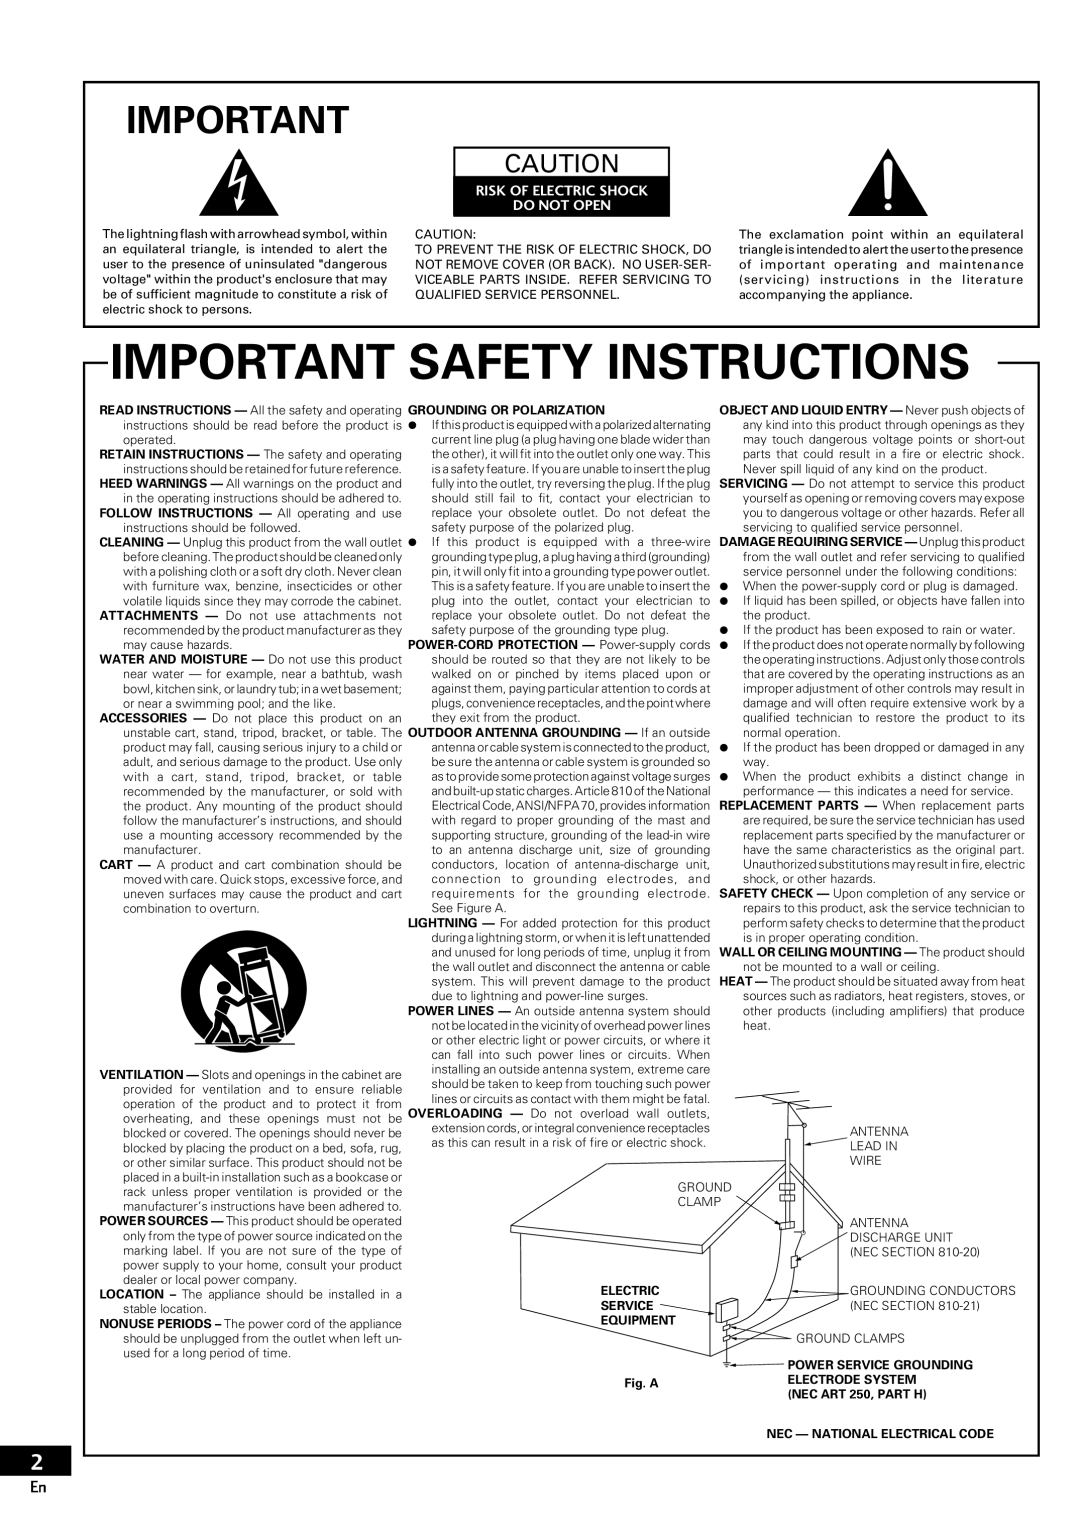 Pioneer PDR-609 operating instructions Important Safety Instructions, Risk Of Electric Shock Do Not Open 